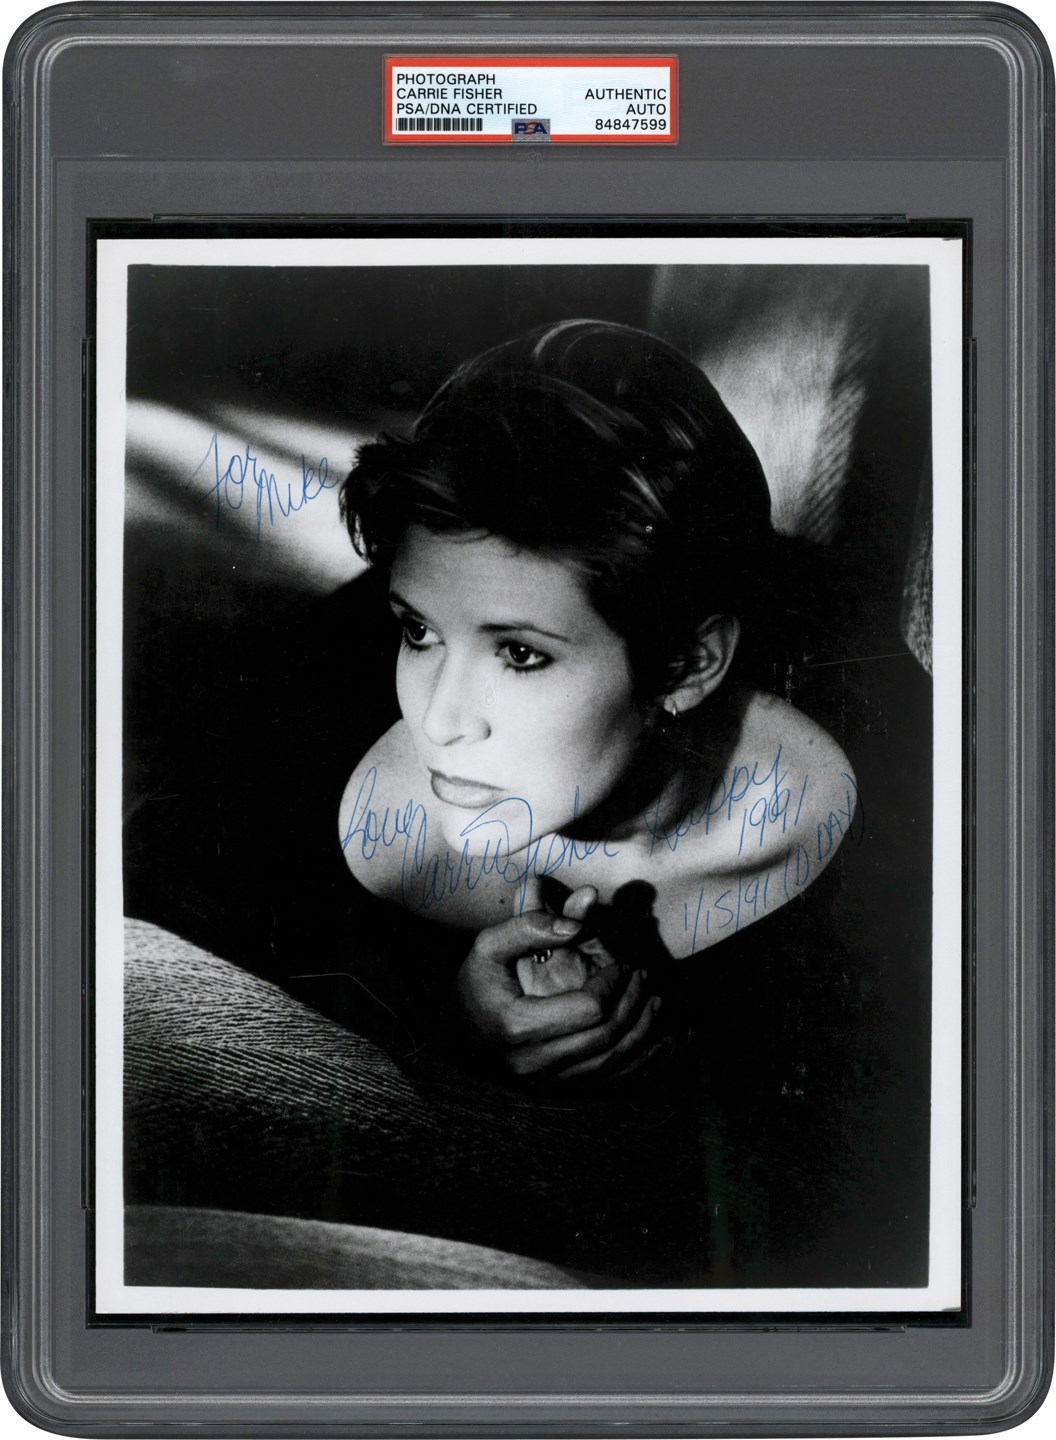 Carrie Fisher Signed "Happy D-Day" Photograph (PSA)